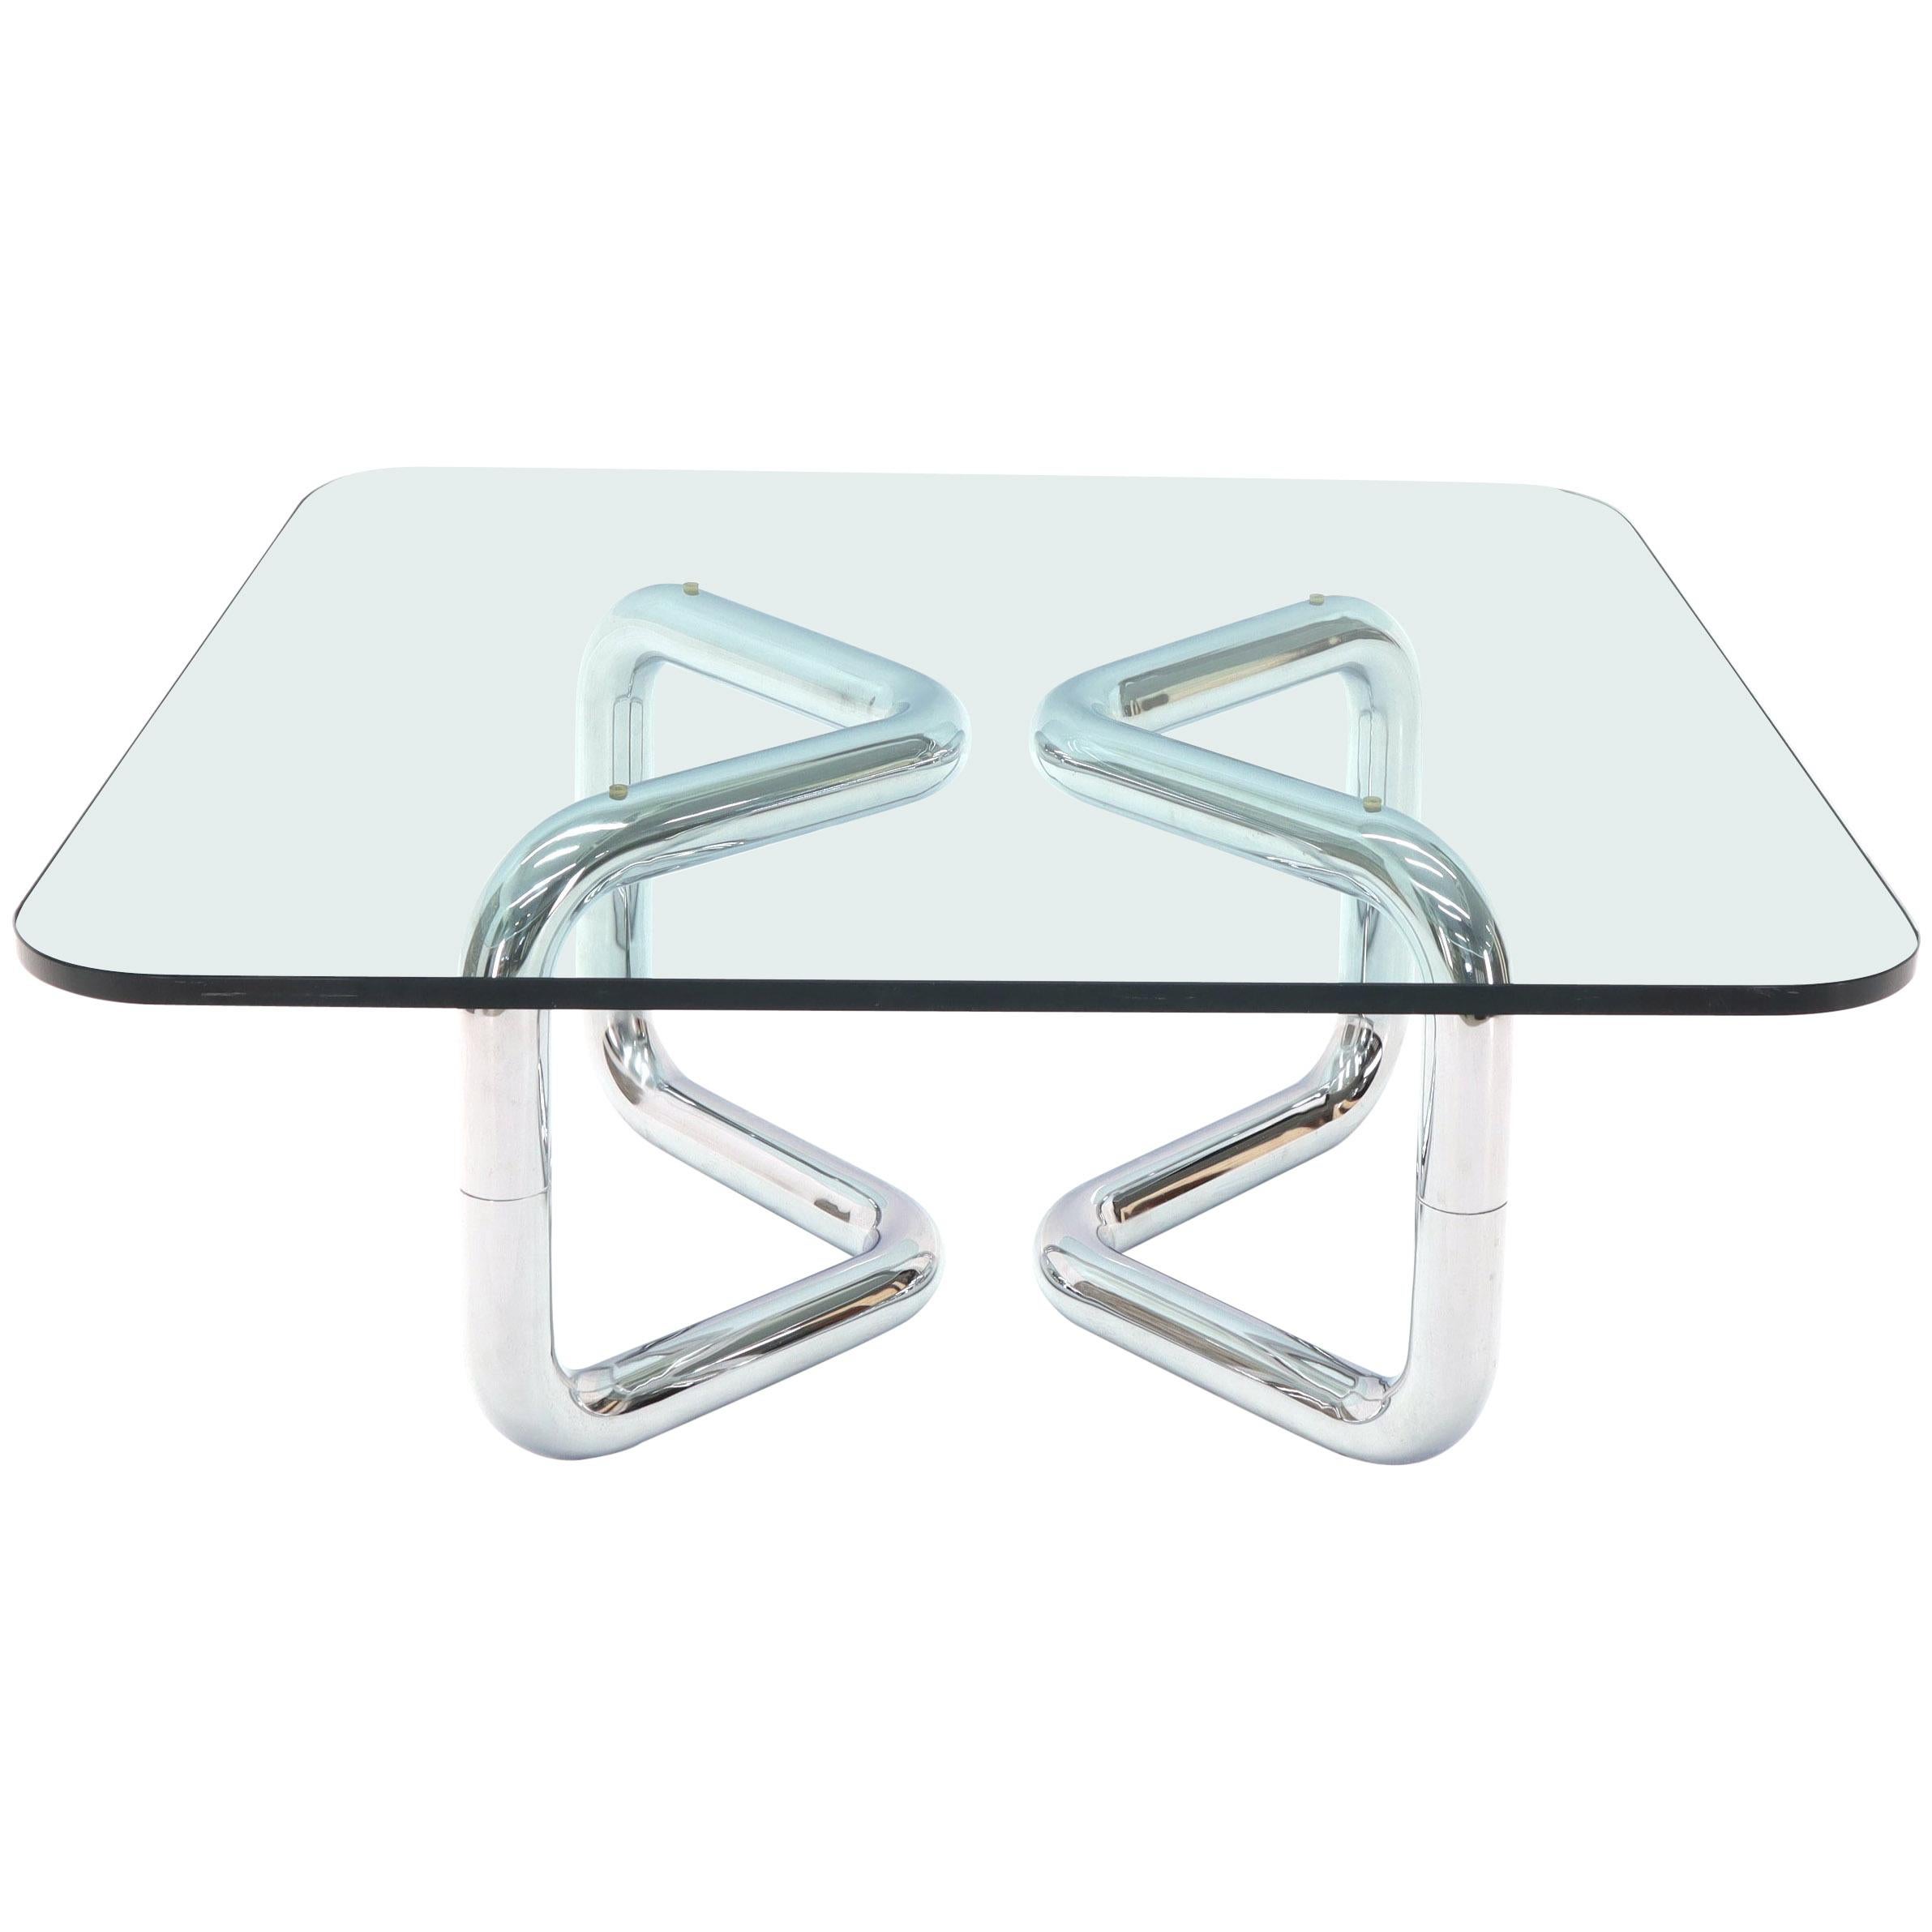 Rounded Corners Square Coffee Table on Thick Bent Tube Chrome Base